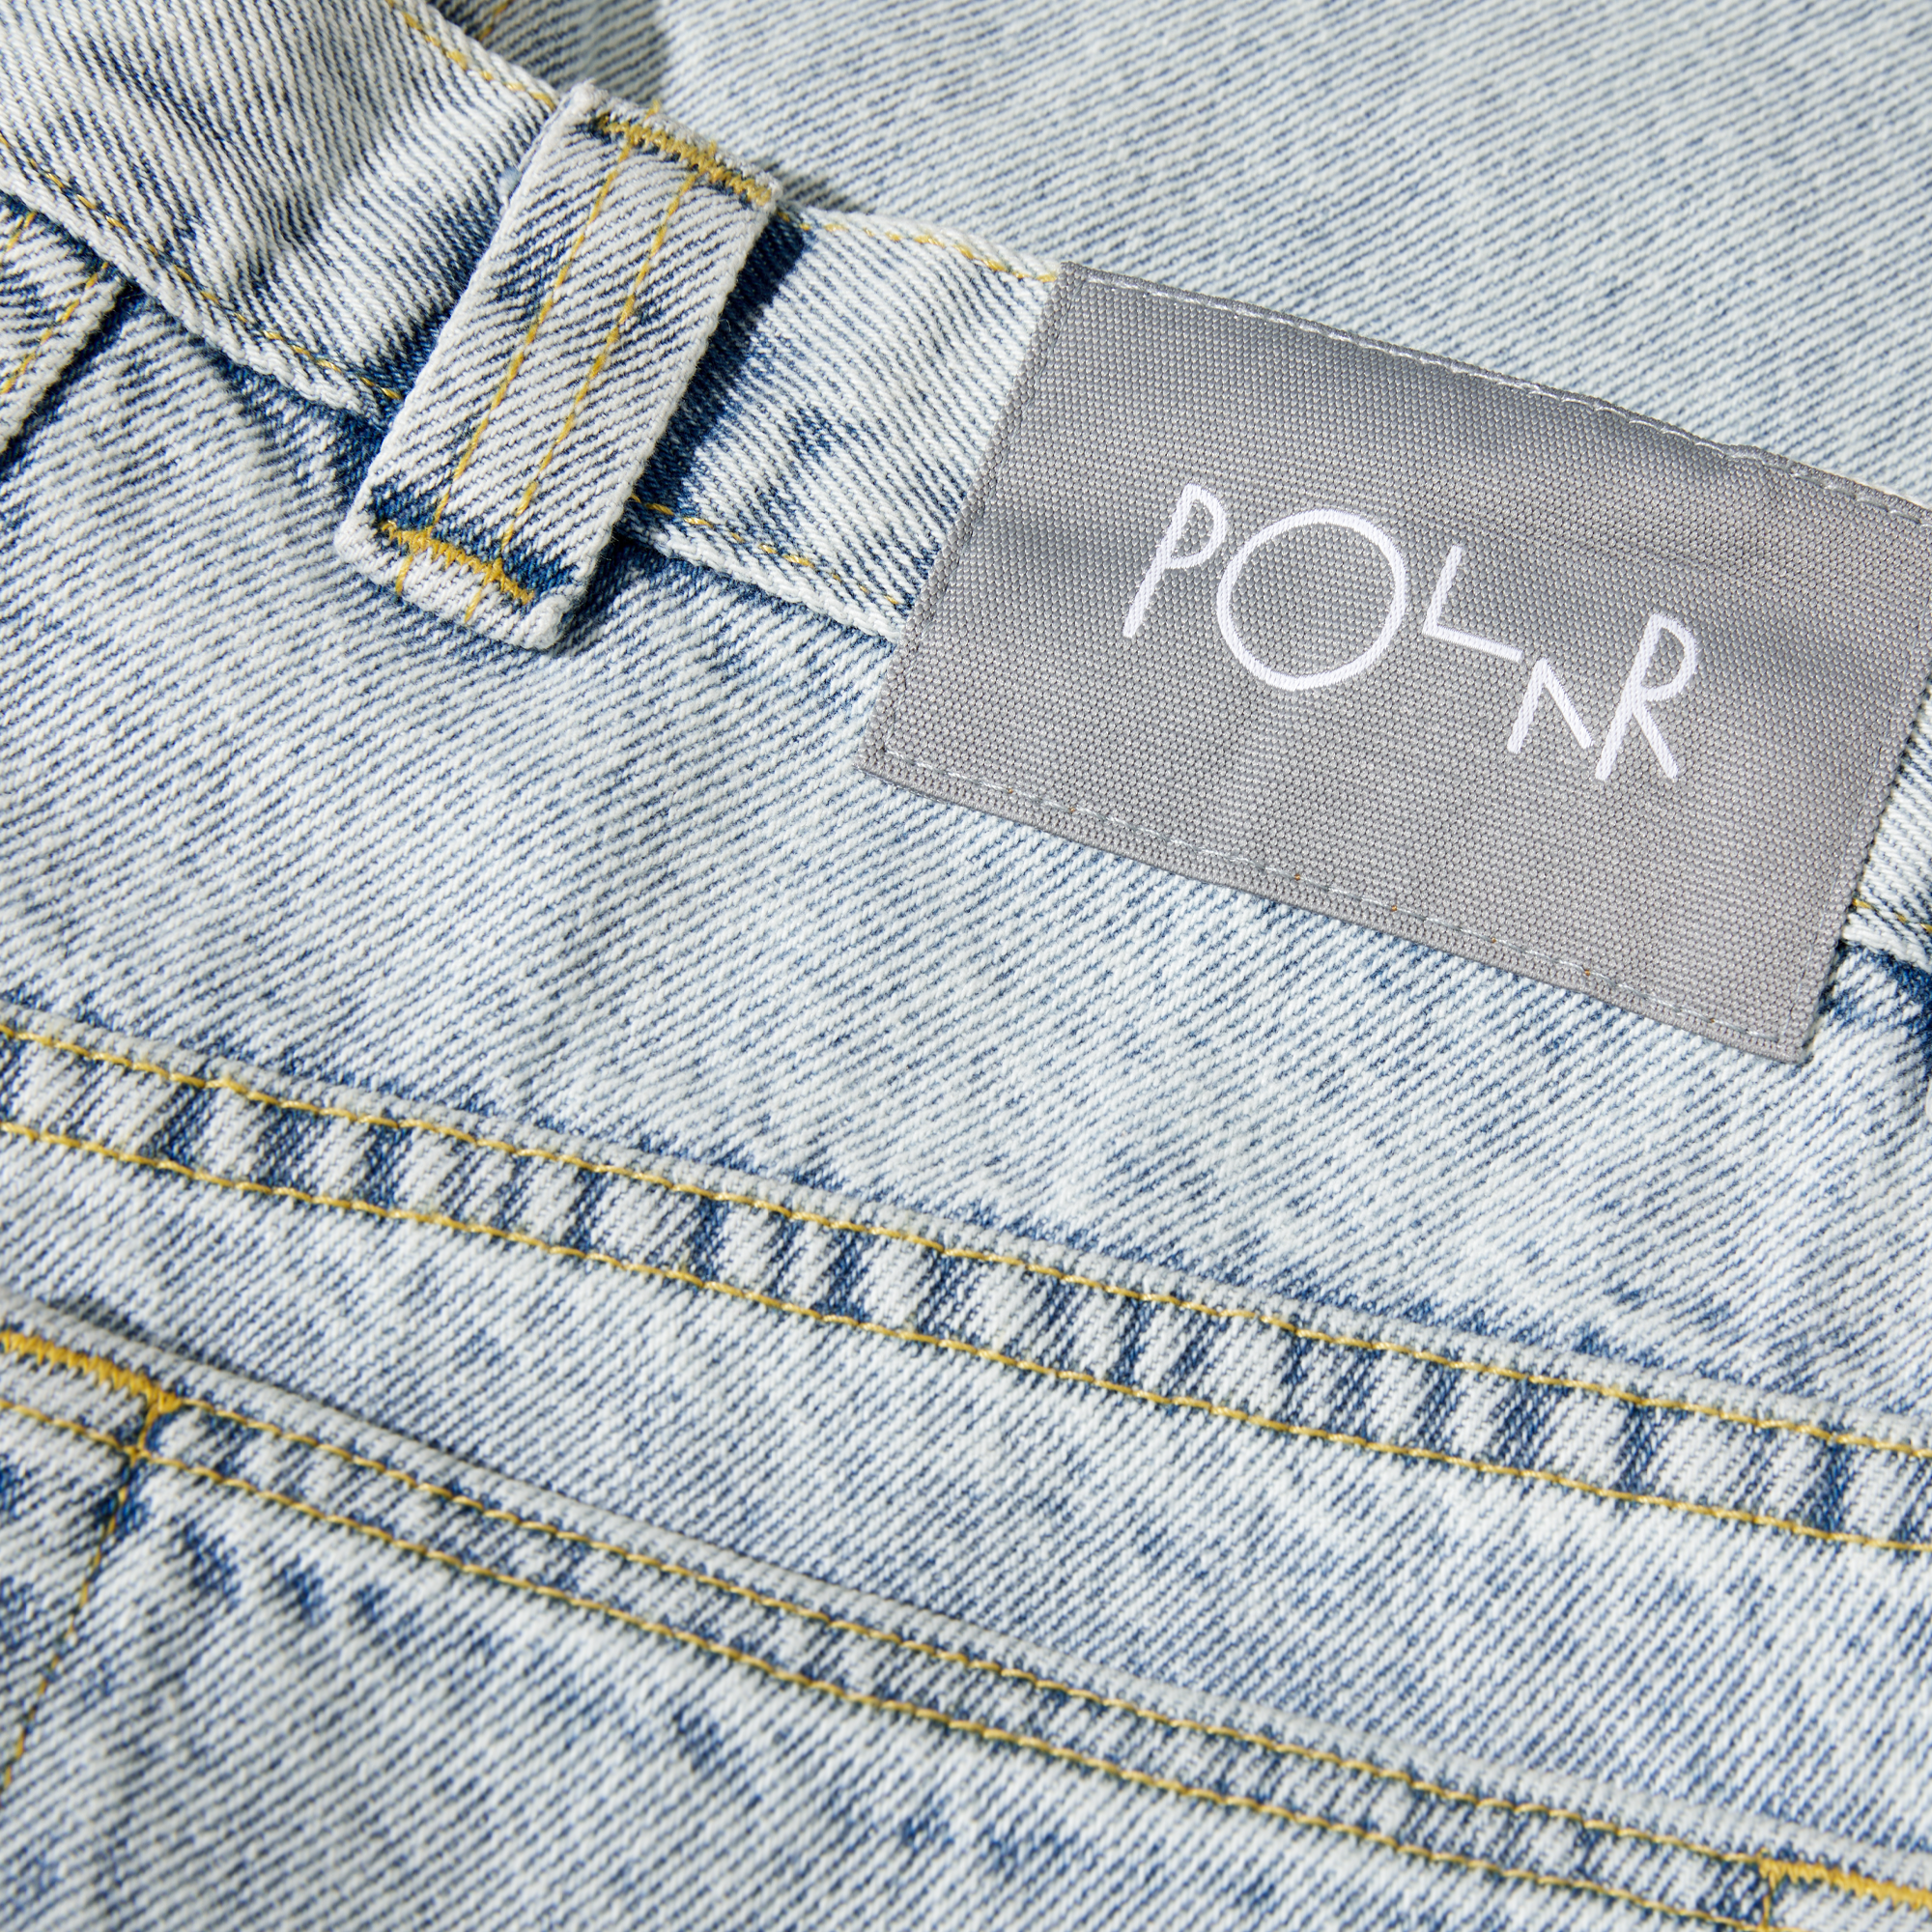 Light blue polar 92 denim baggy jeans with grey tab on back. Free uk shipping on orders over £50